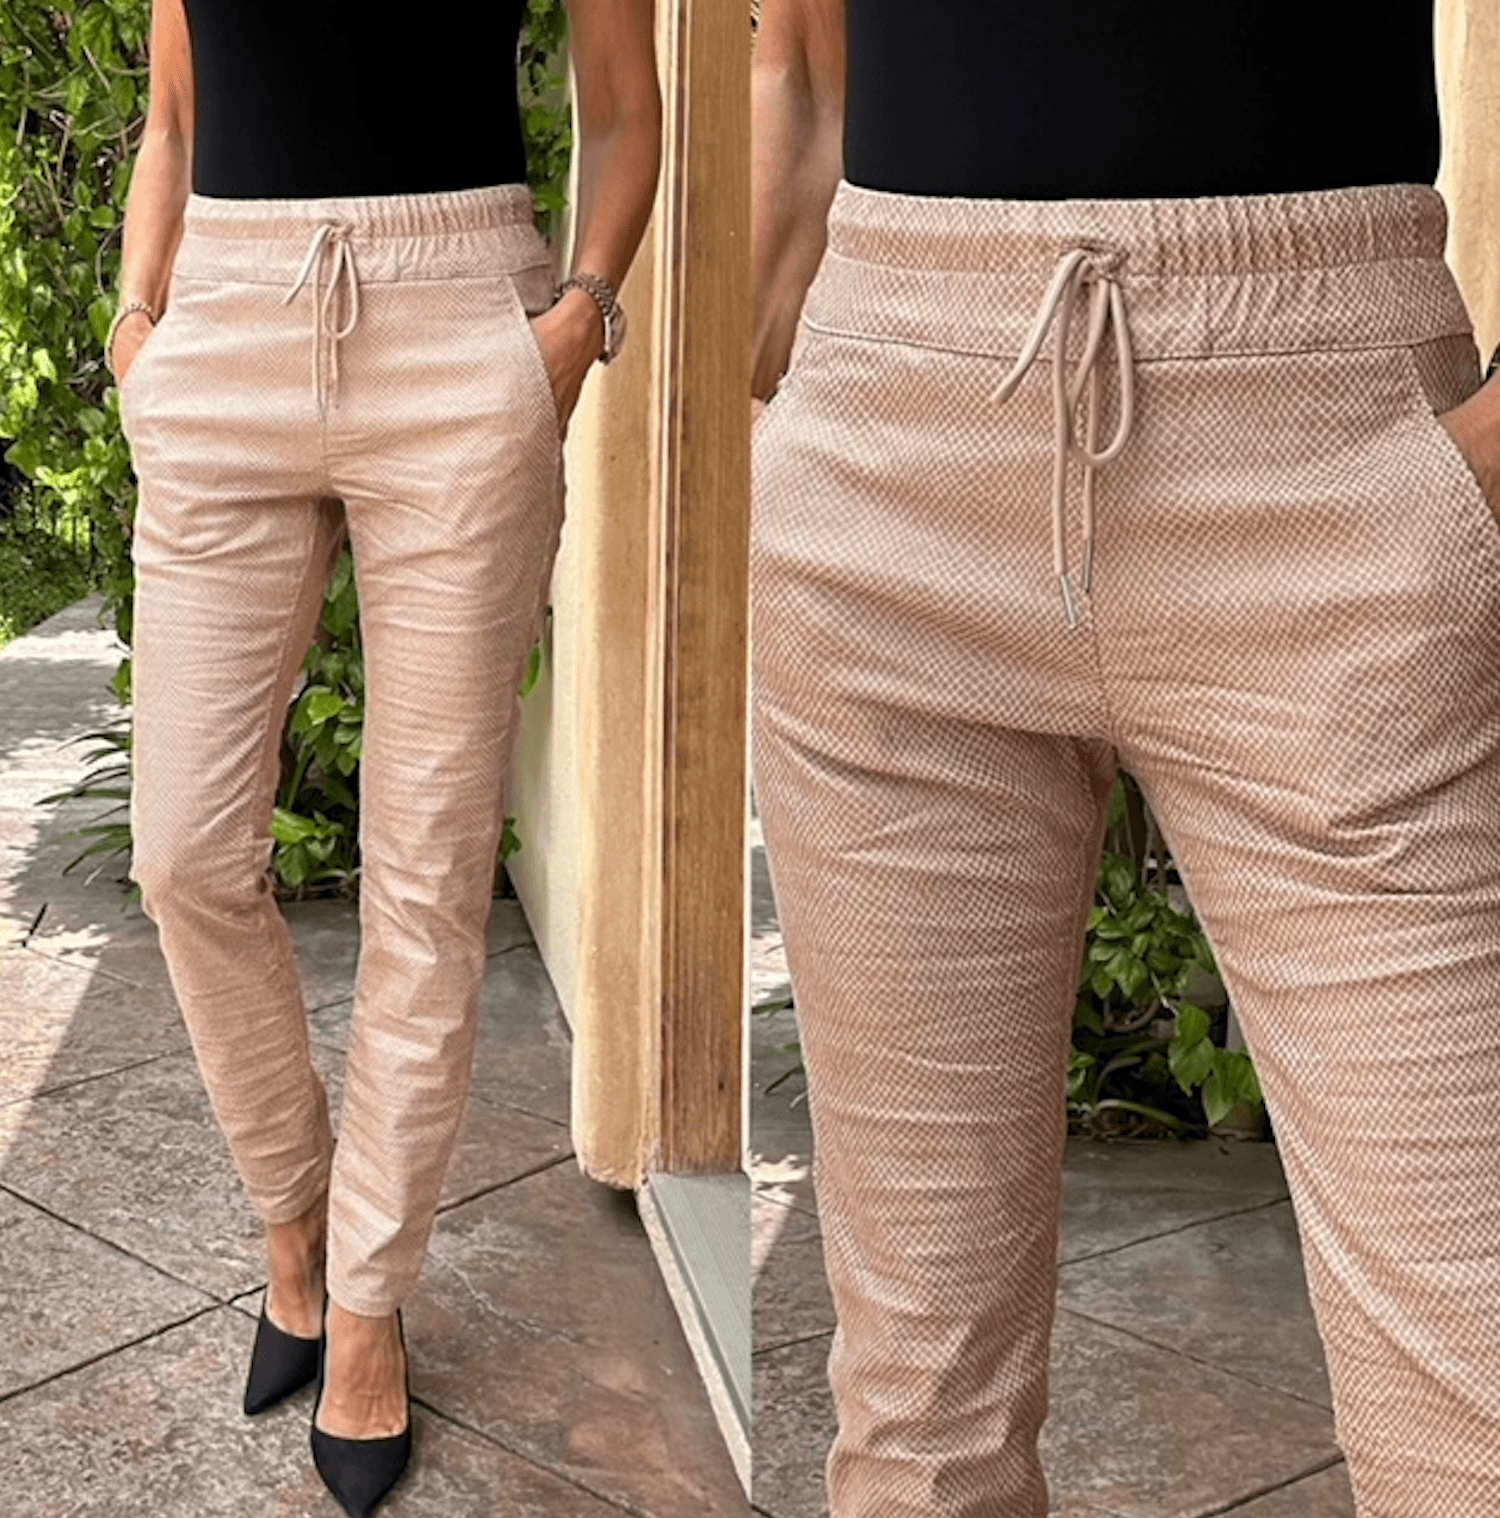 Shely Pant by Bevy Flog - Haven